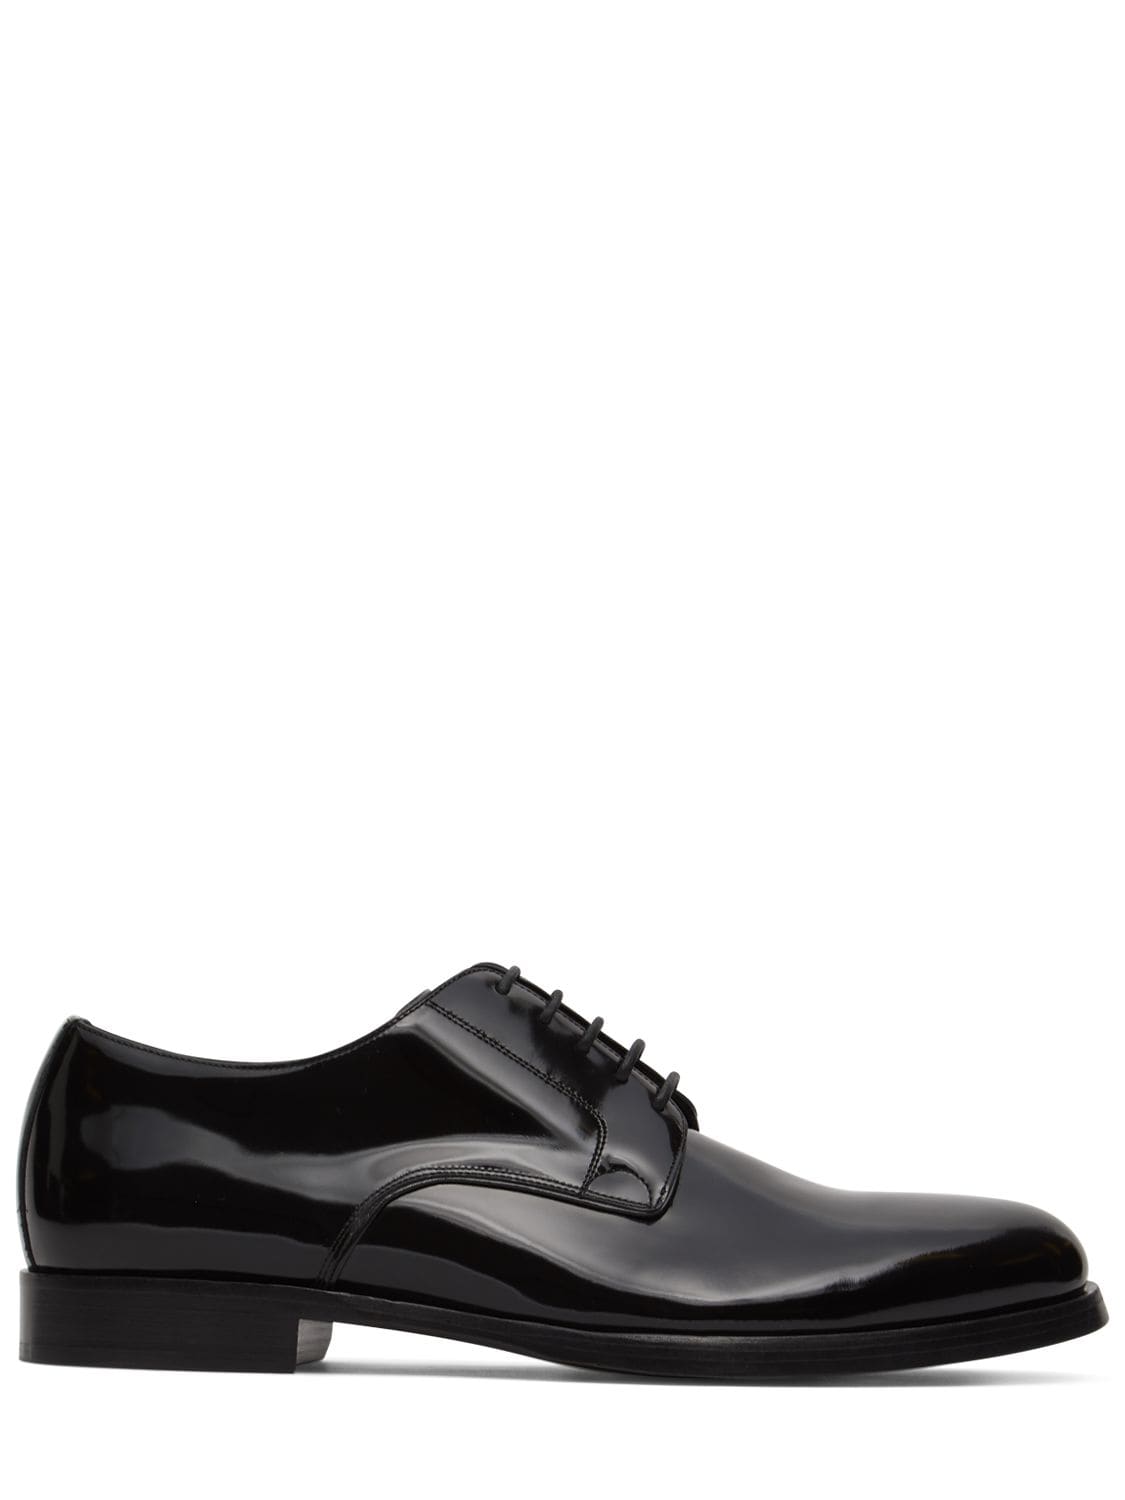 Dolce & Gabbana Formal Leather Derby Shoes In Black